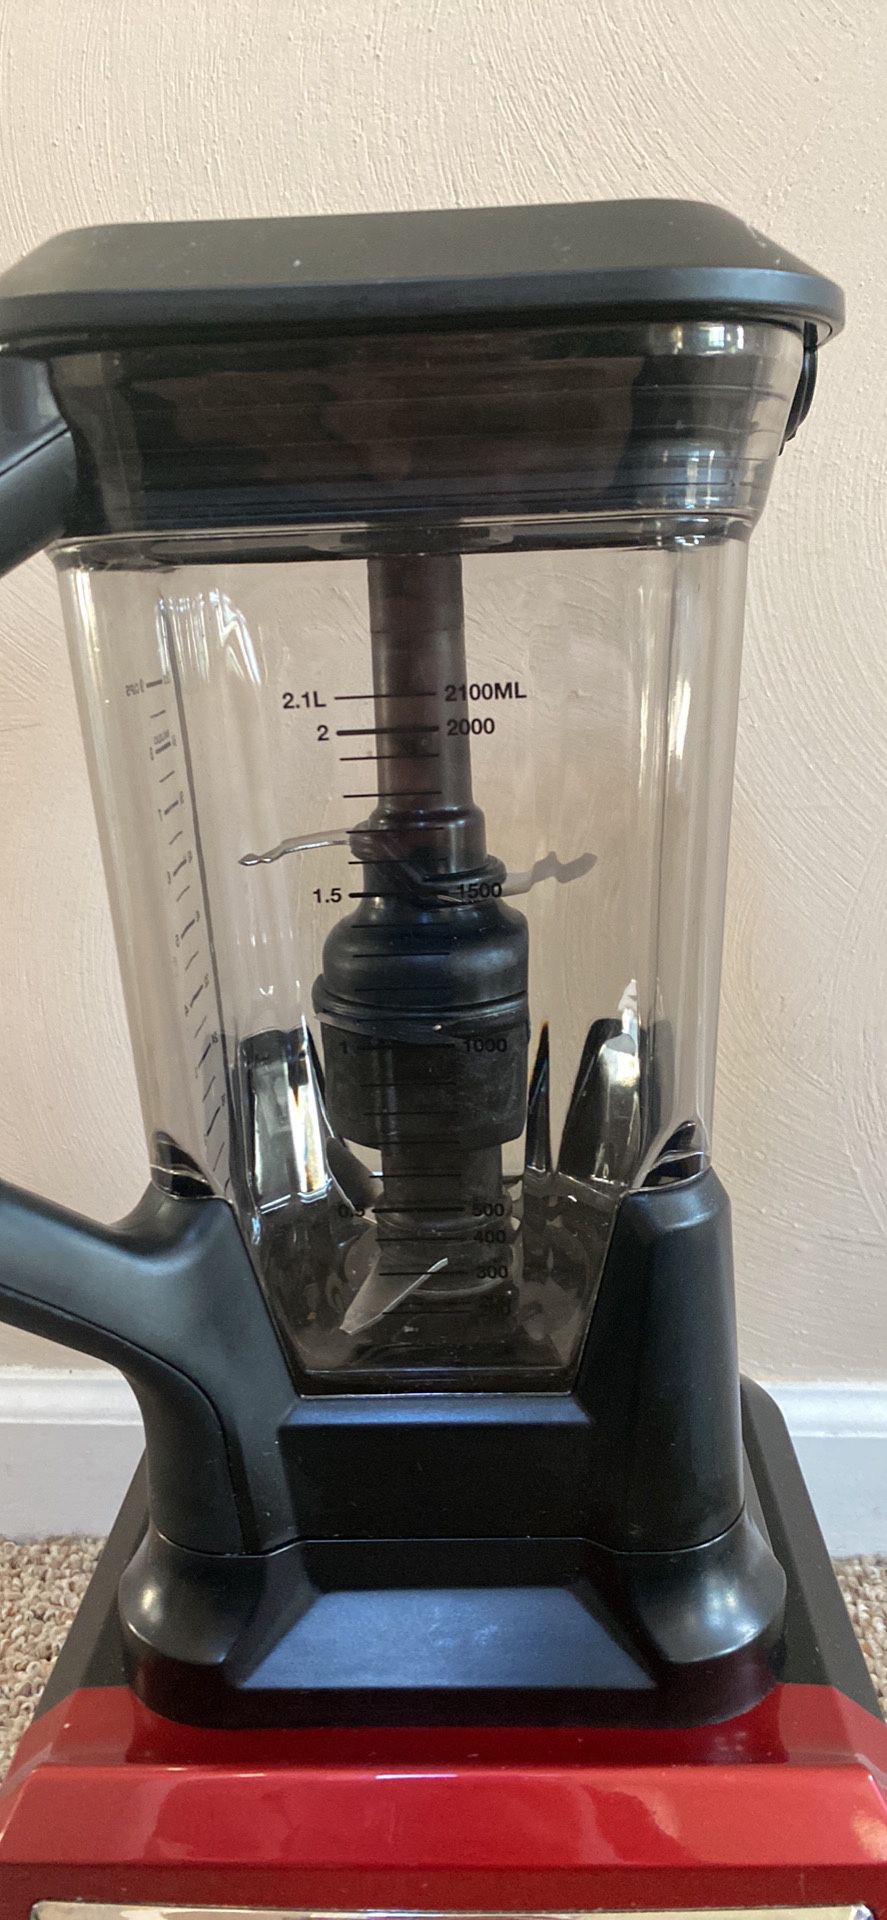 🎉 Score a Ninja Professional Blender With Cups as low as $84 +